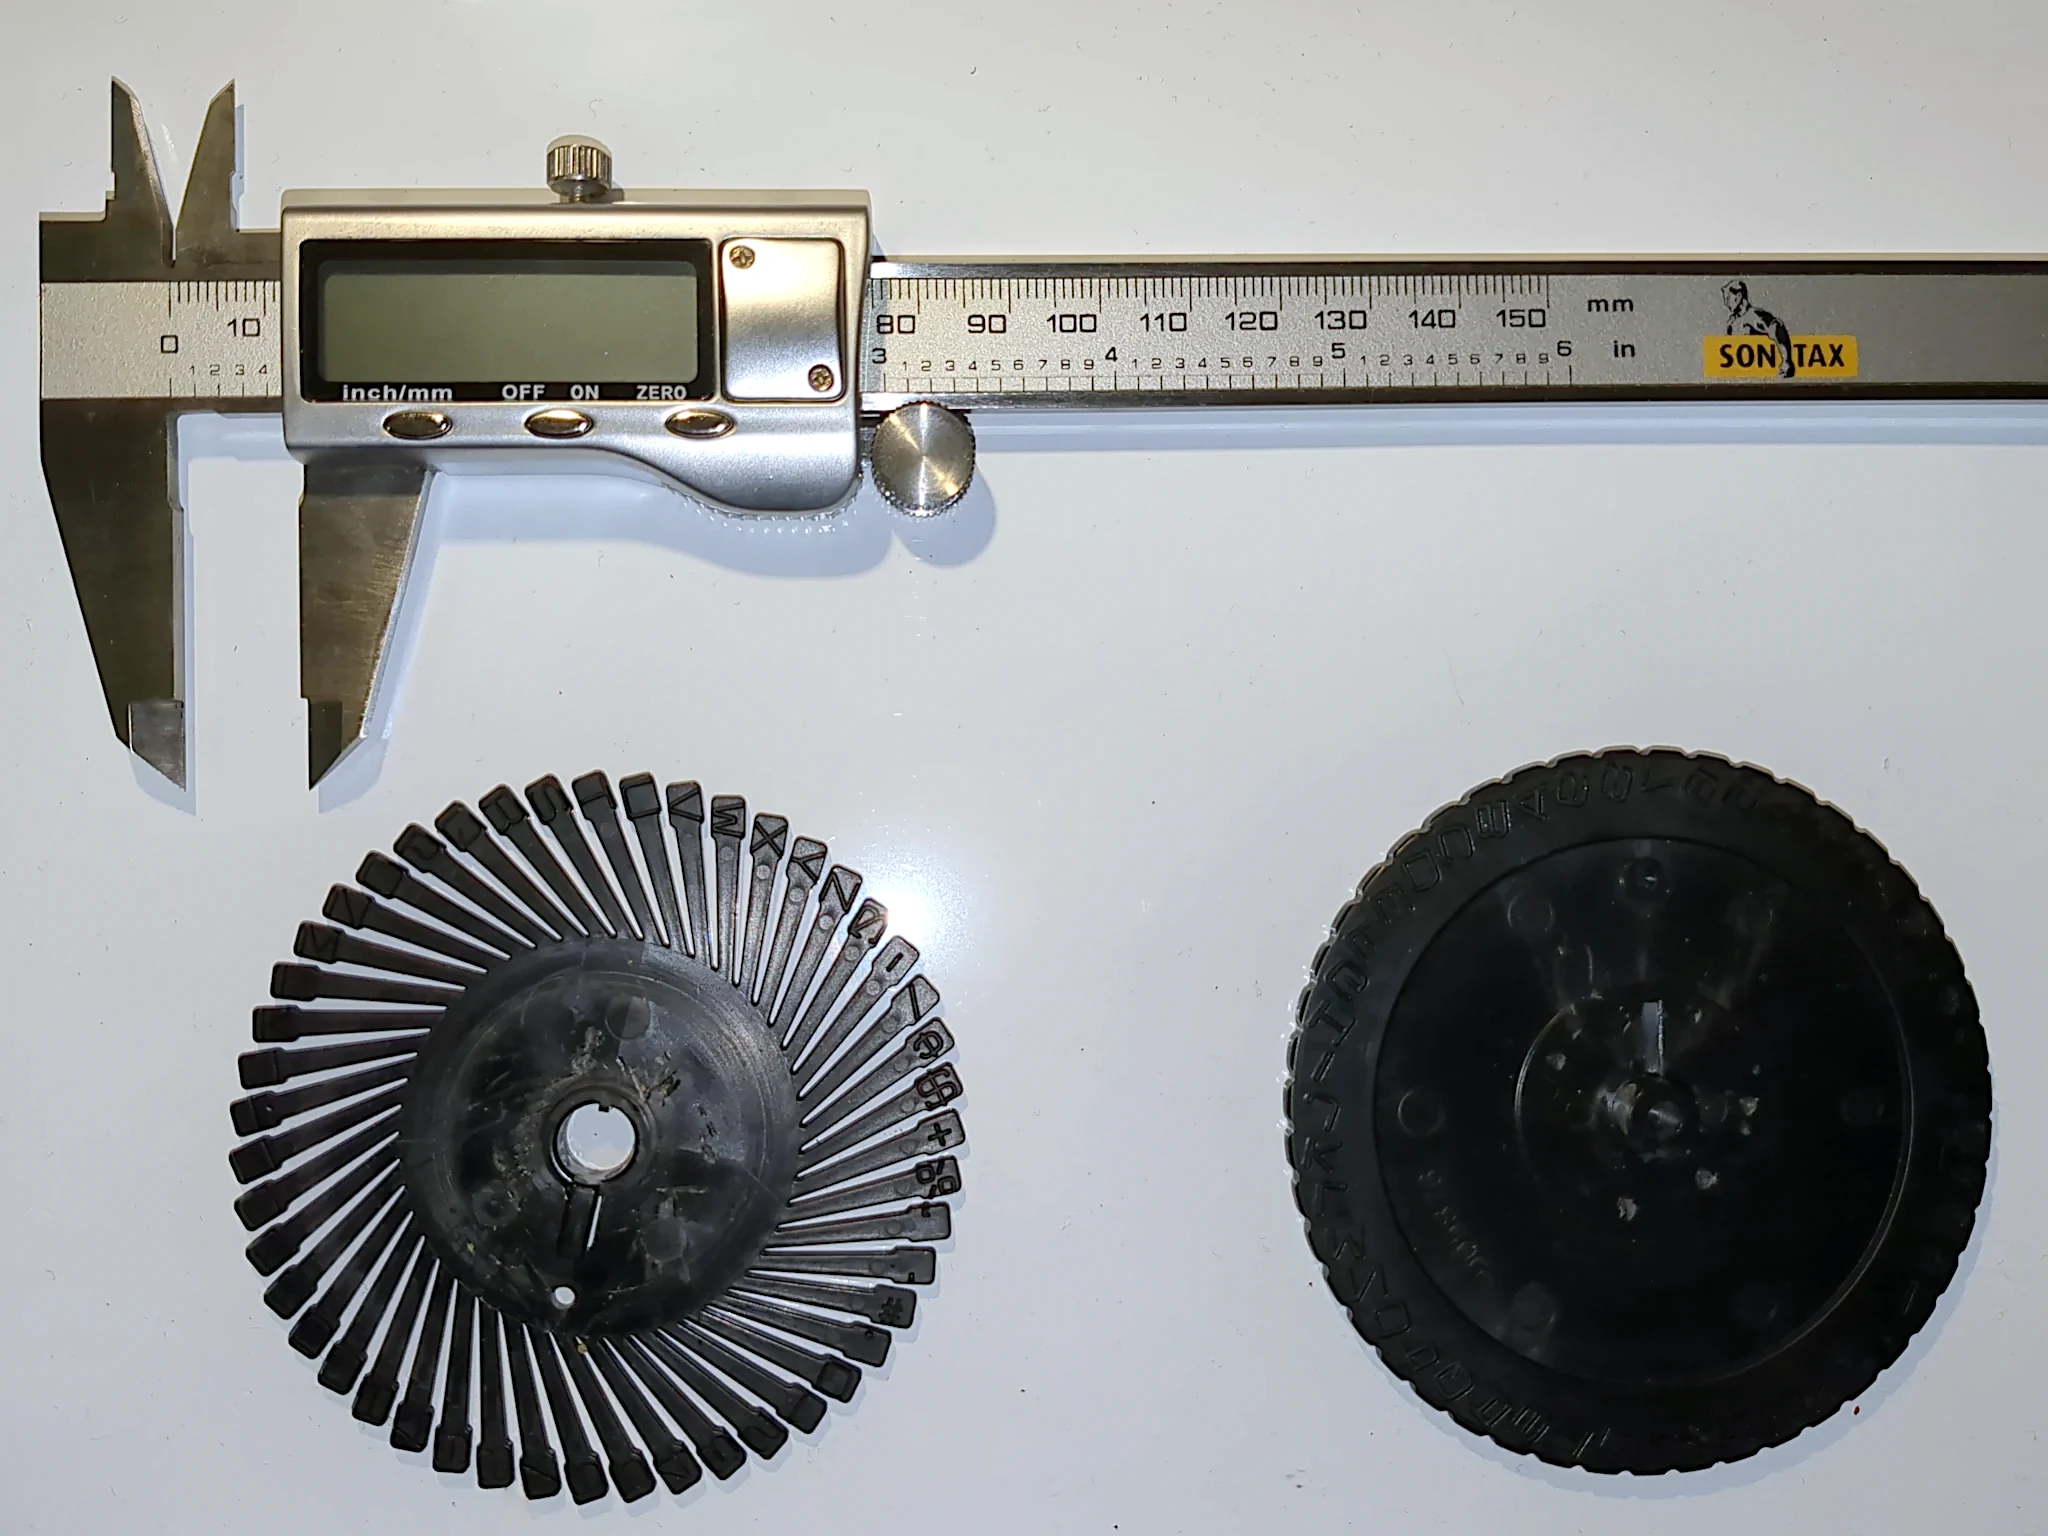 Origional punch-wheel parts and my digital calipers.